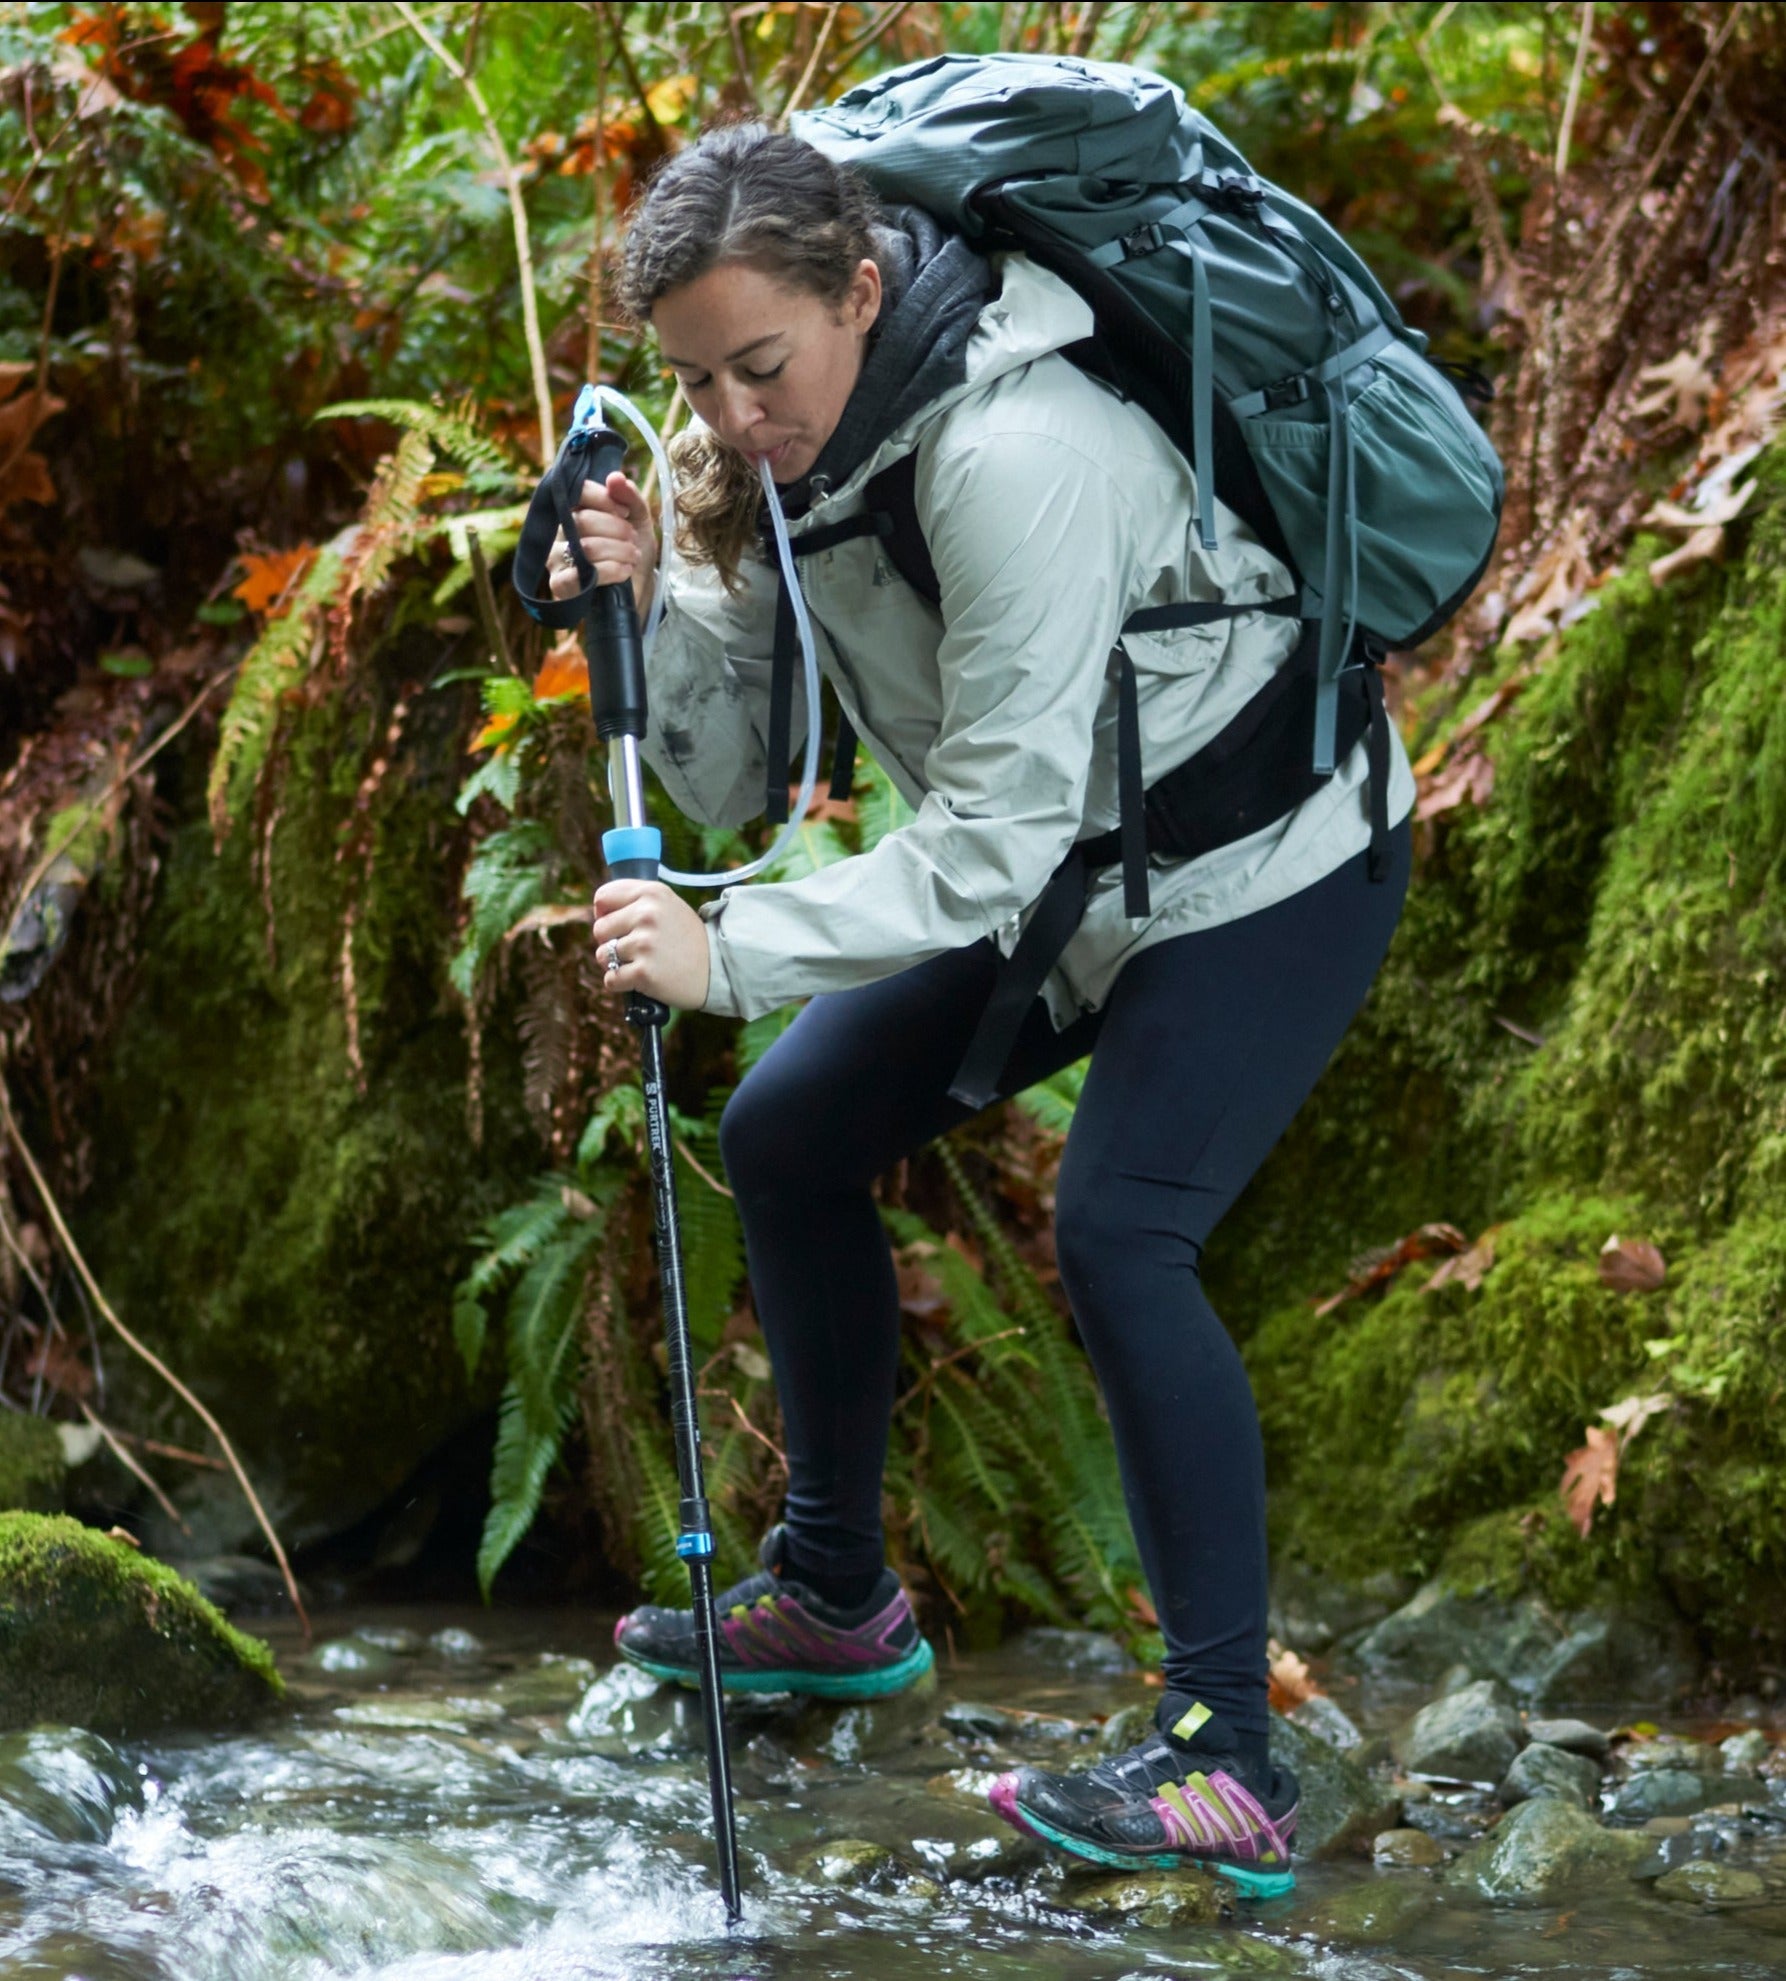 Trekking pole & water filter in 1! With PurTrek, say goodbye to awkward filtering, the inability to fill a container, or simply going without crucial hydration